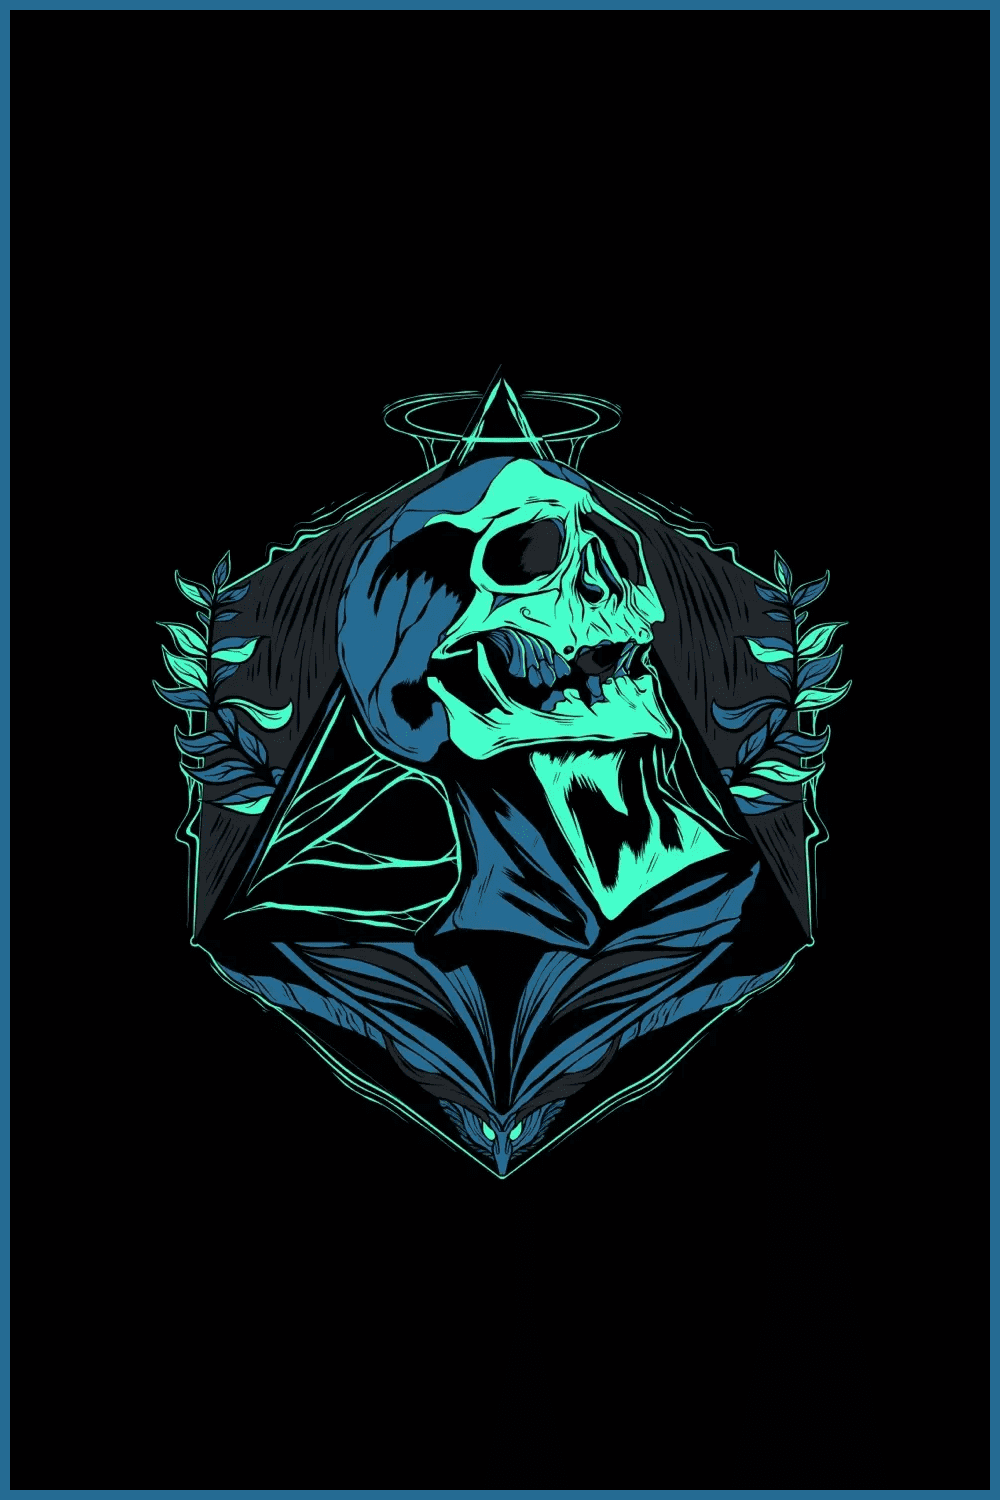 Stylish image of a skull in green and blue on a black background.